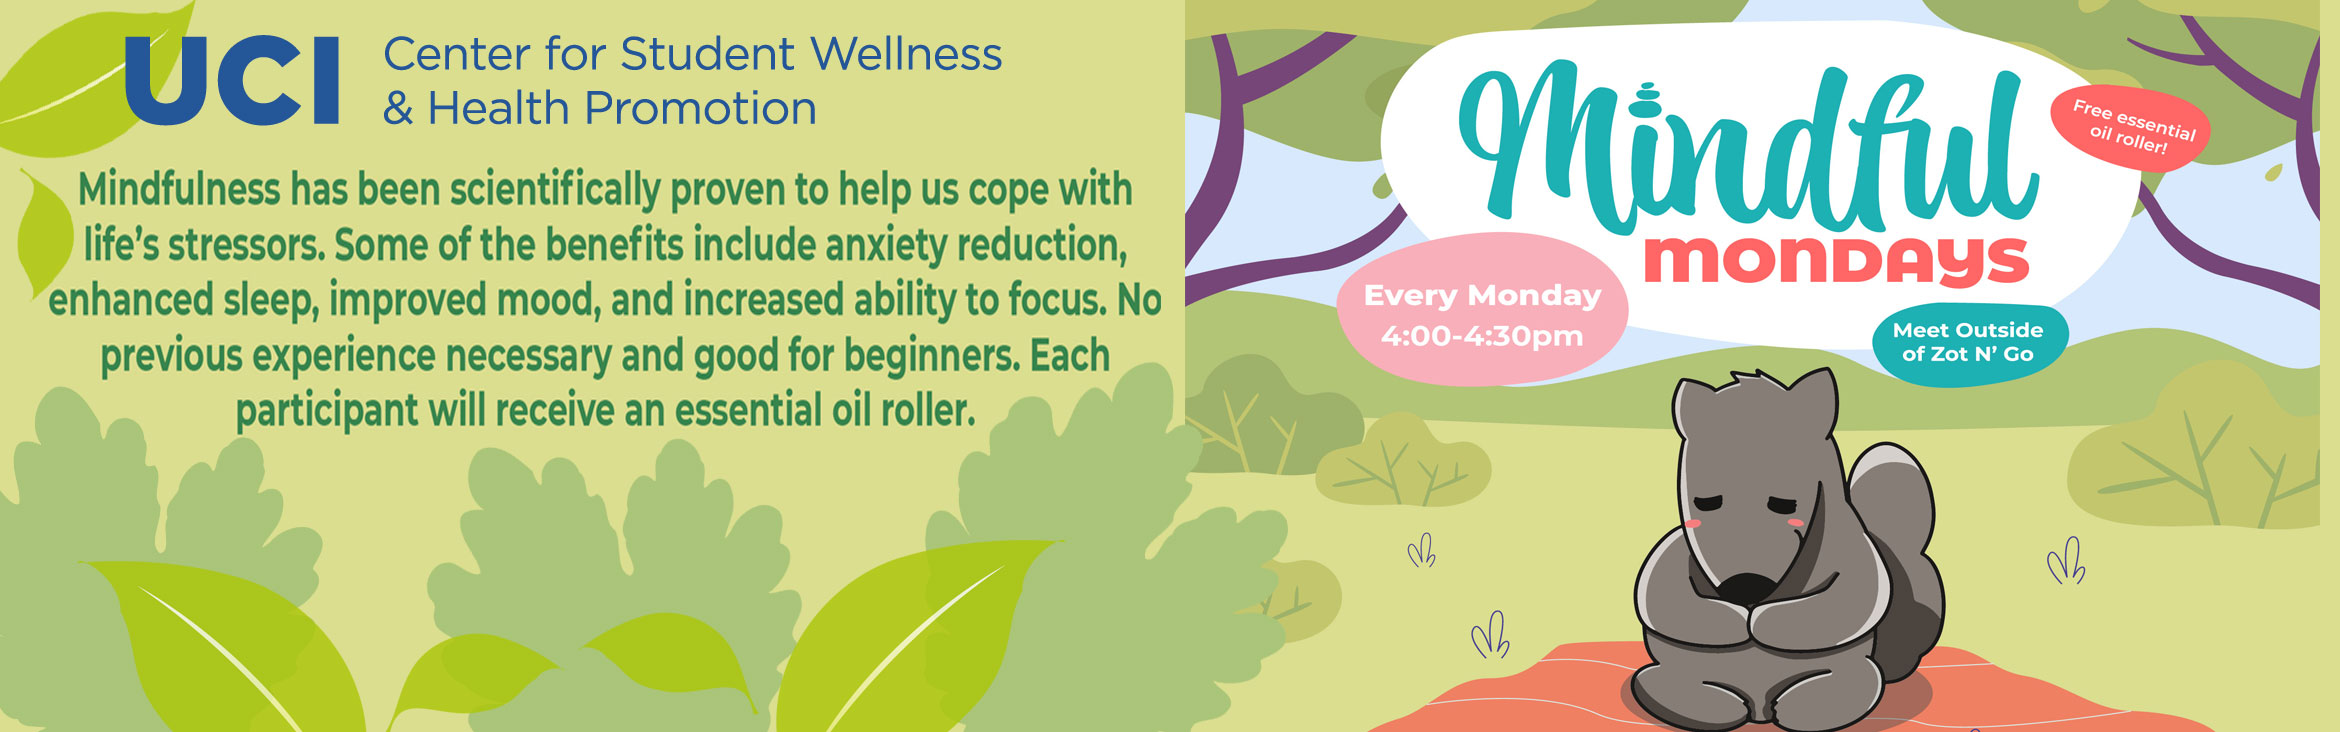 Mindful Mondays-Every Monday 4:00-4:30pm-Meet Outside Zot-n-Go